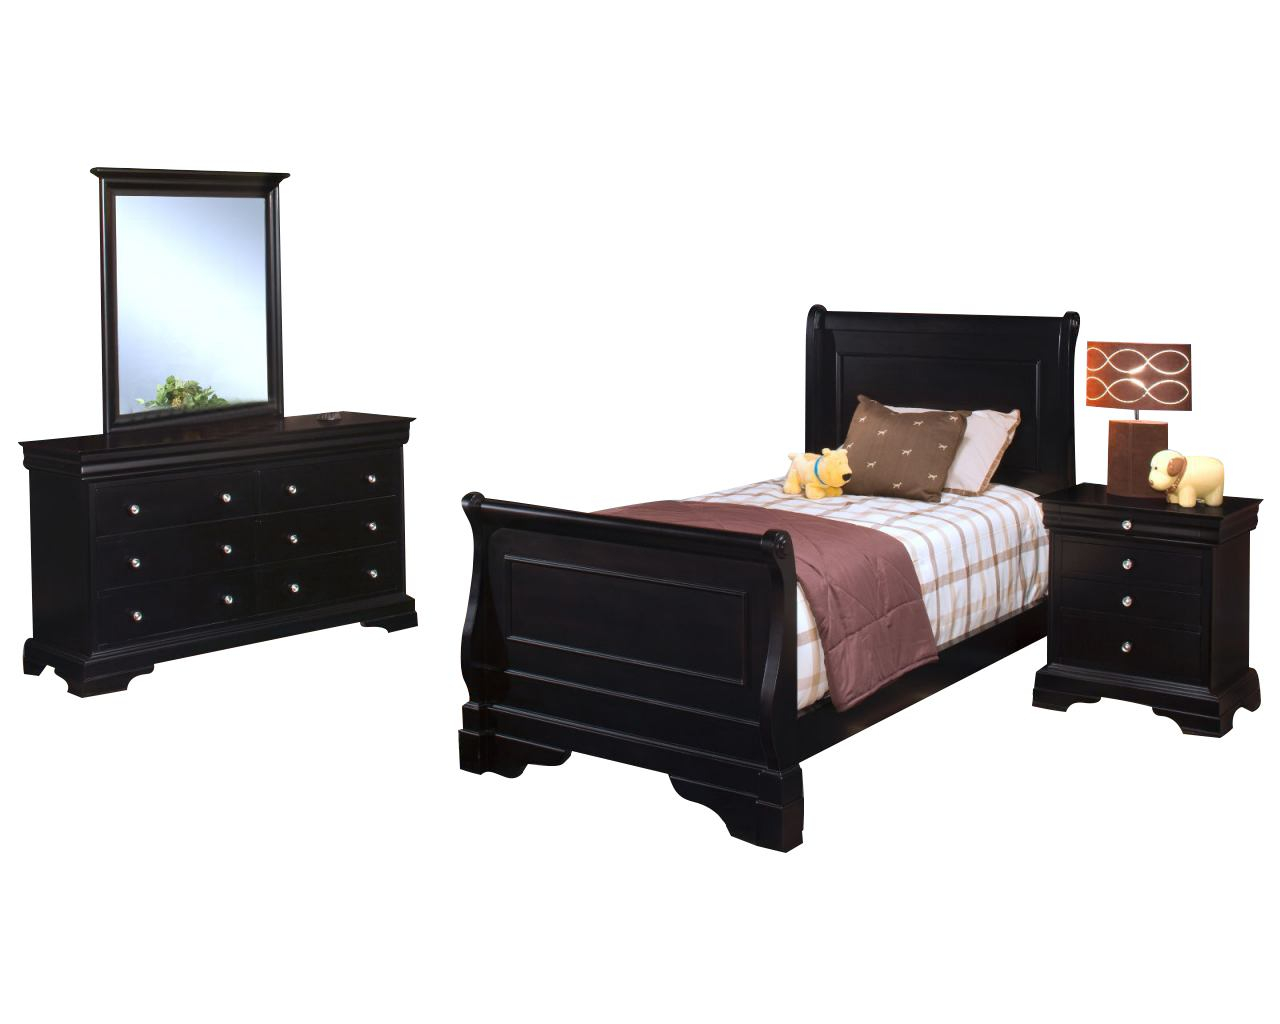 New Classic Belle Rose Youth Sleigh Bedroom Set In Bordeaux Finish 00 013 within sizing 1280 X 1024